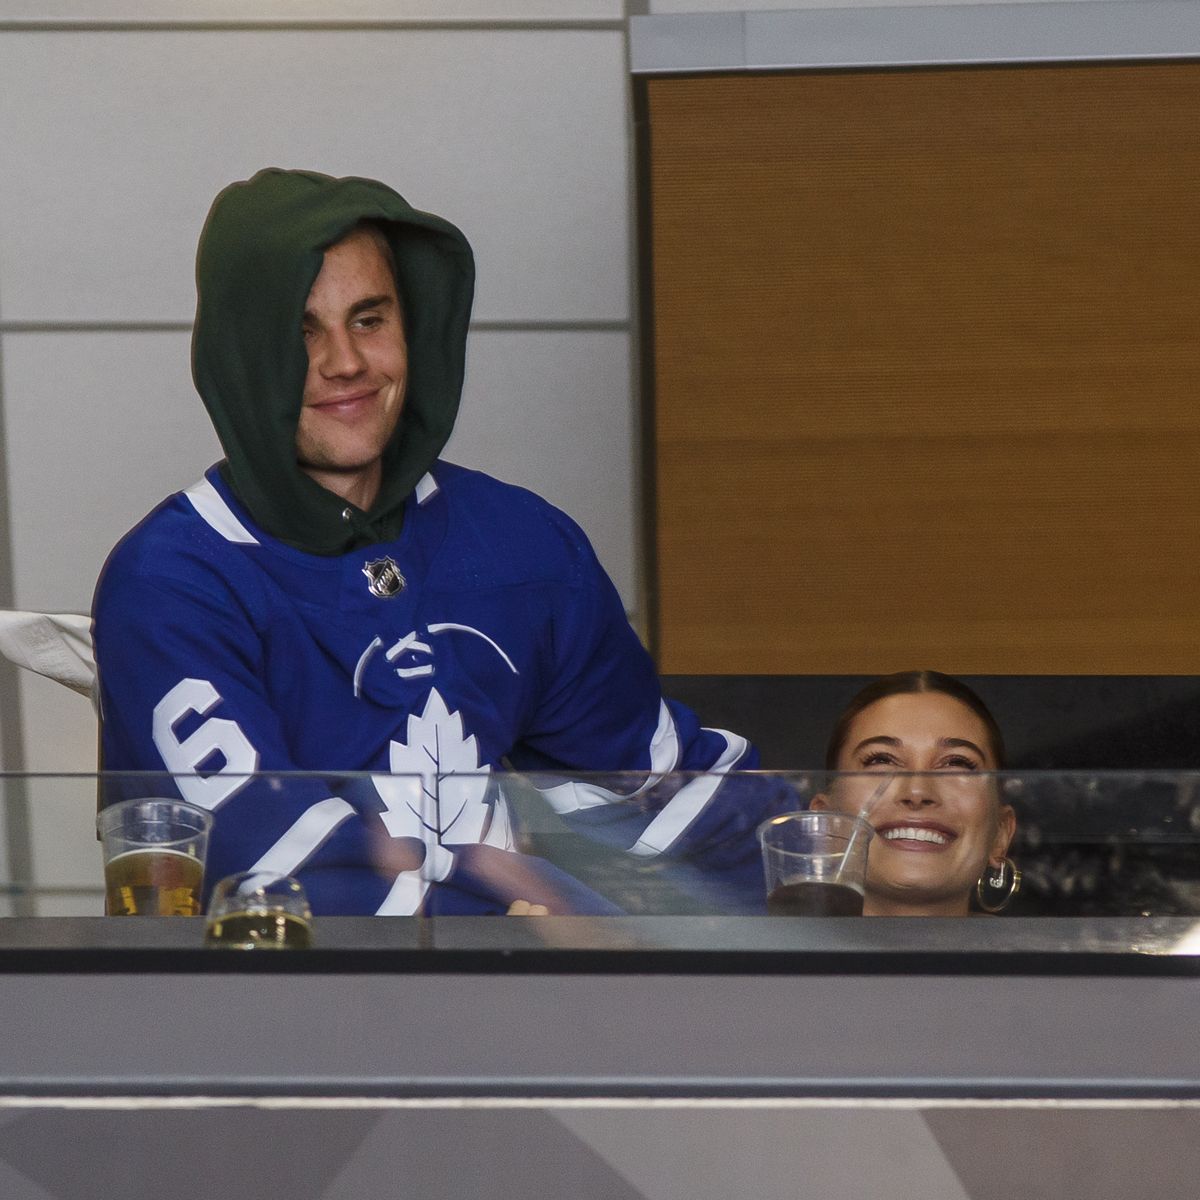 Justin Bieber and Hailey Baldwin Make Out at a Toronto Maple Leafs Hockey  Game